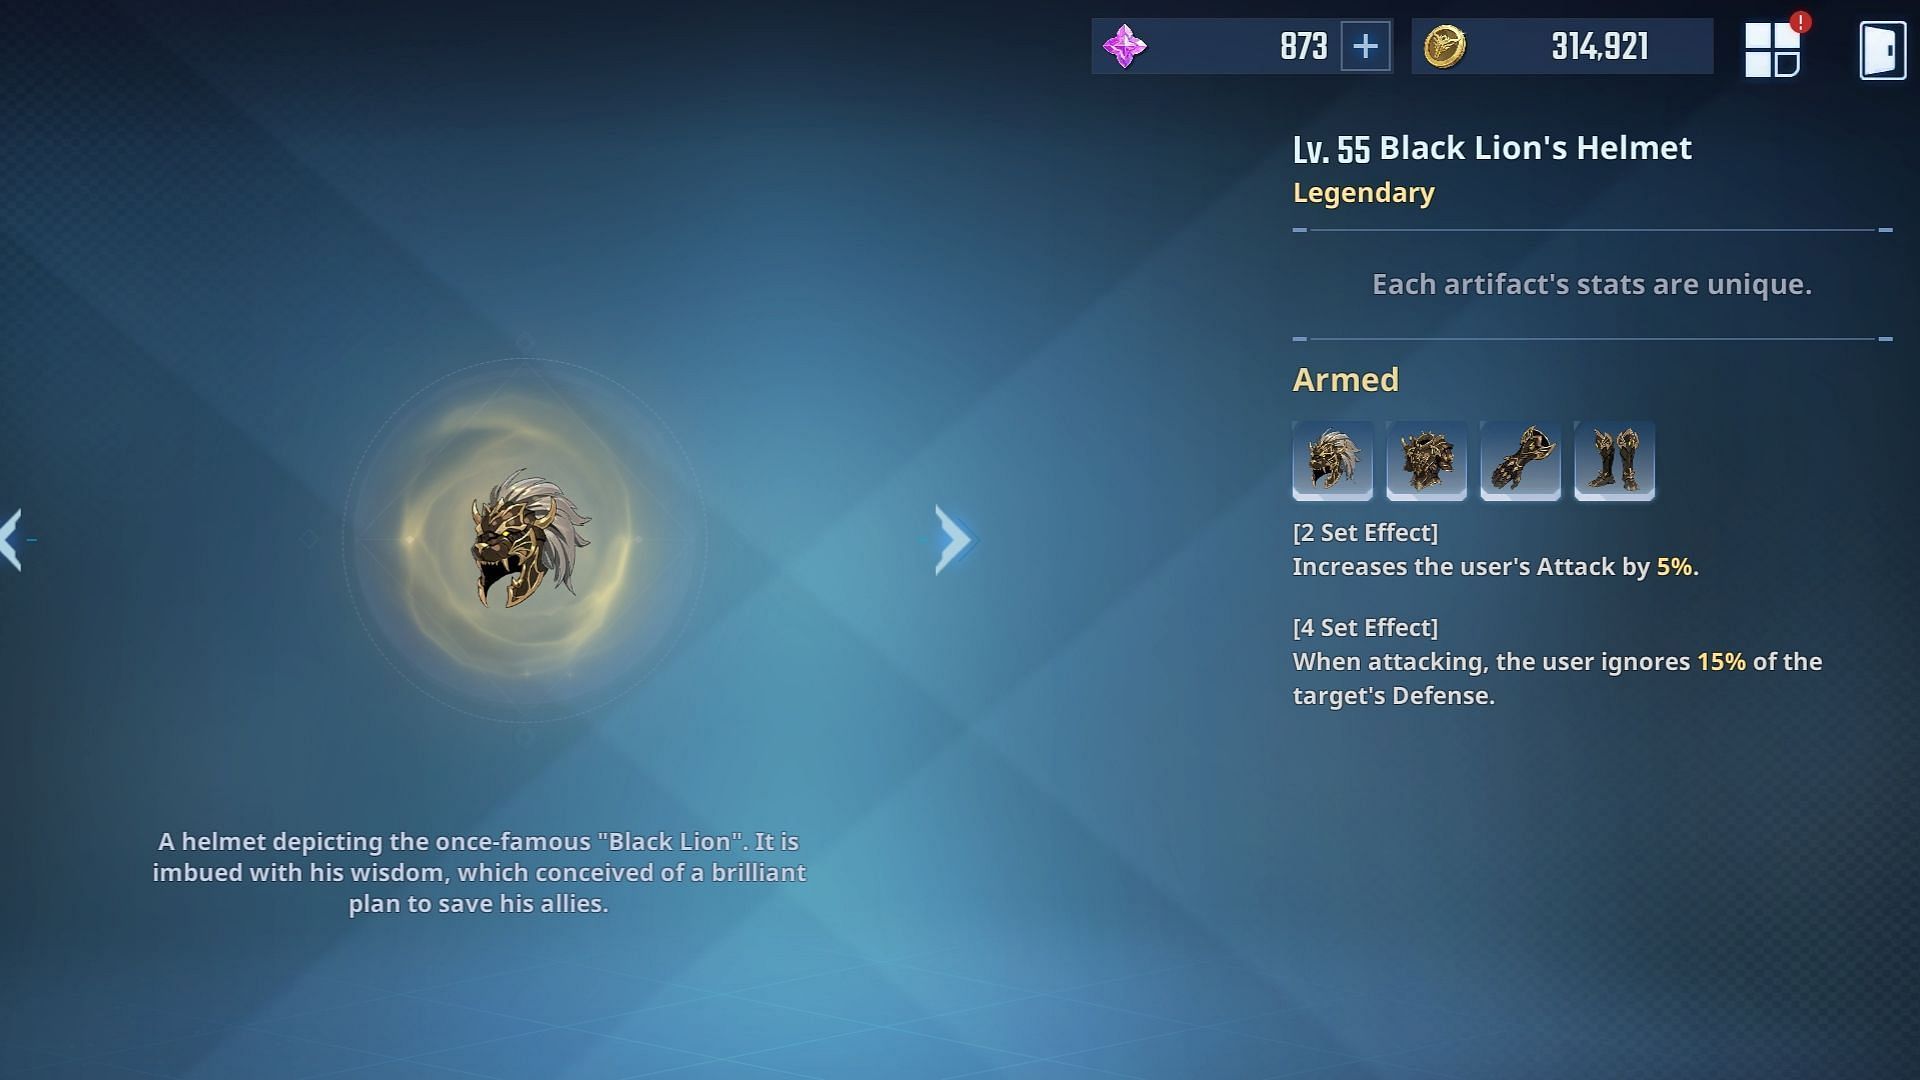 Armed artifacts in Solo Leveling Arise. (Image via Netmarble)